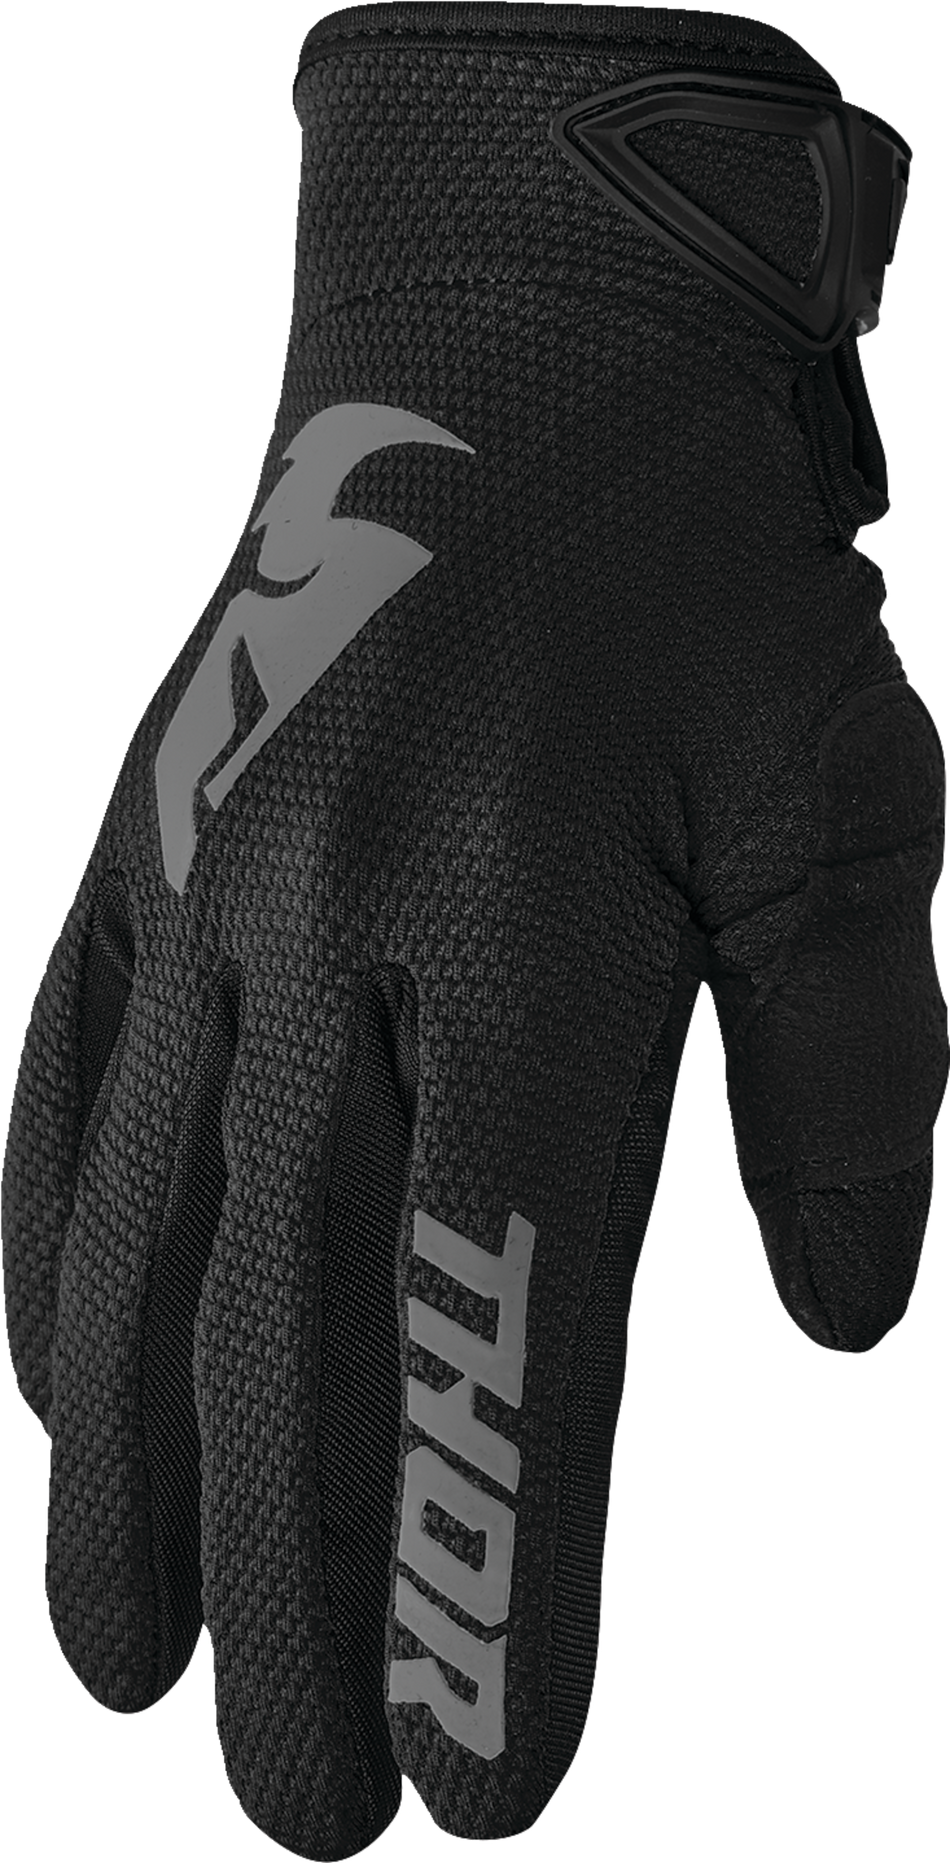 THOR Sector Gloves - Black/Gray - Large 3330-7252